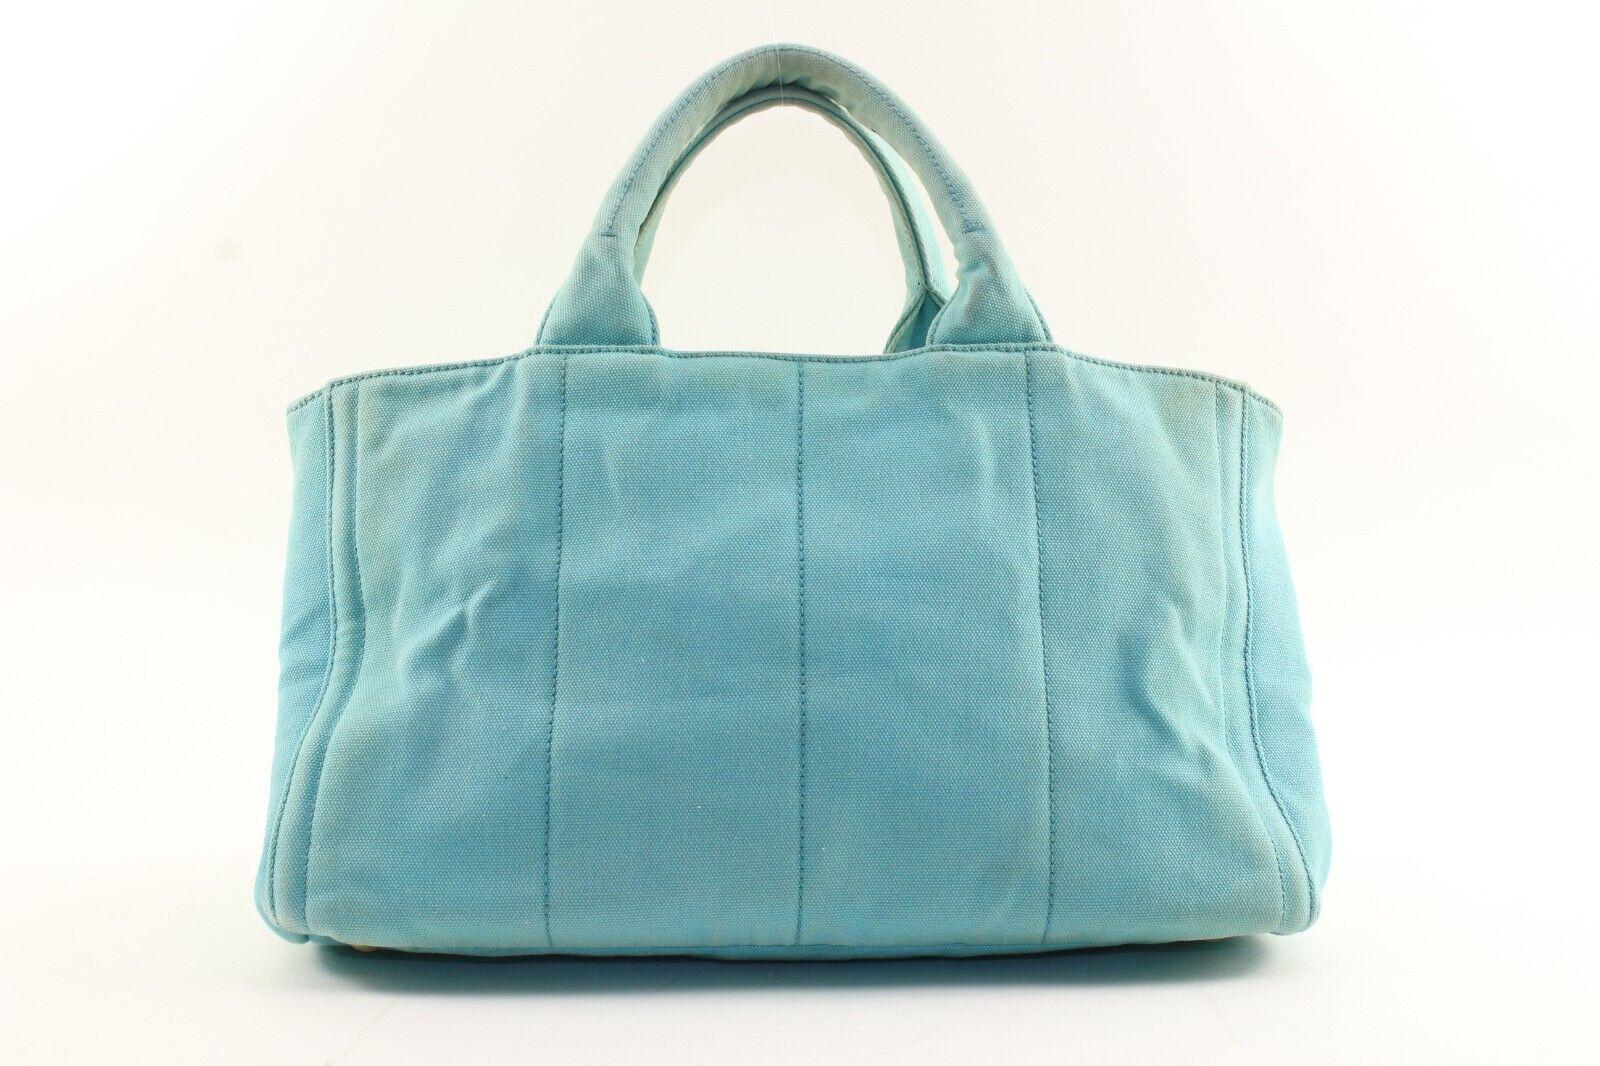 PRADA Light Blue 2way Crystal Grommet Tote 1PR1220K In Good Condition For Sale In Dix hills, NY